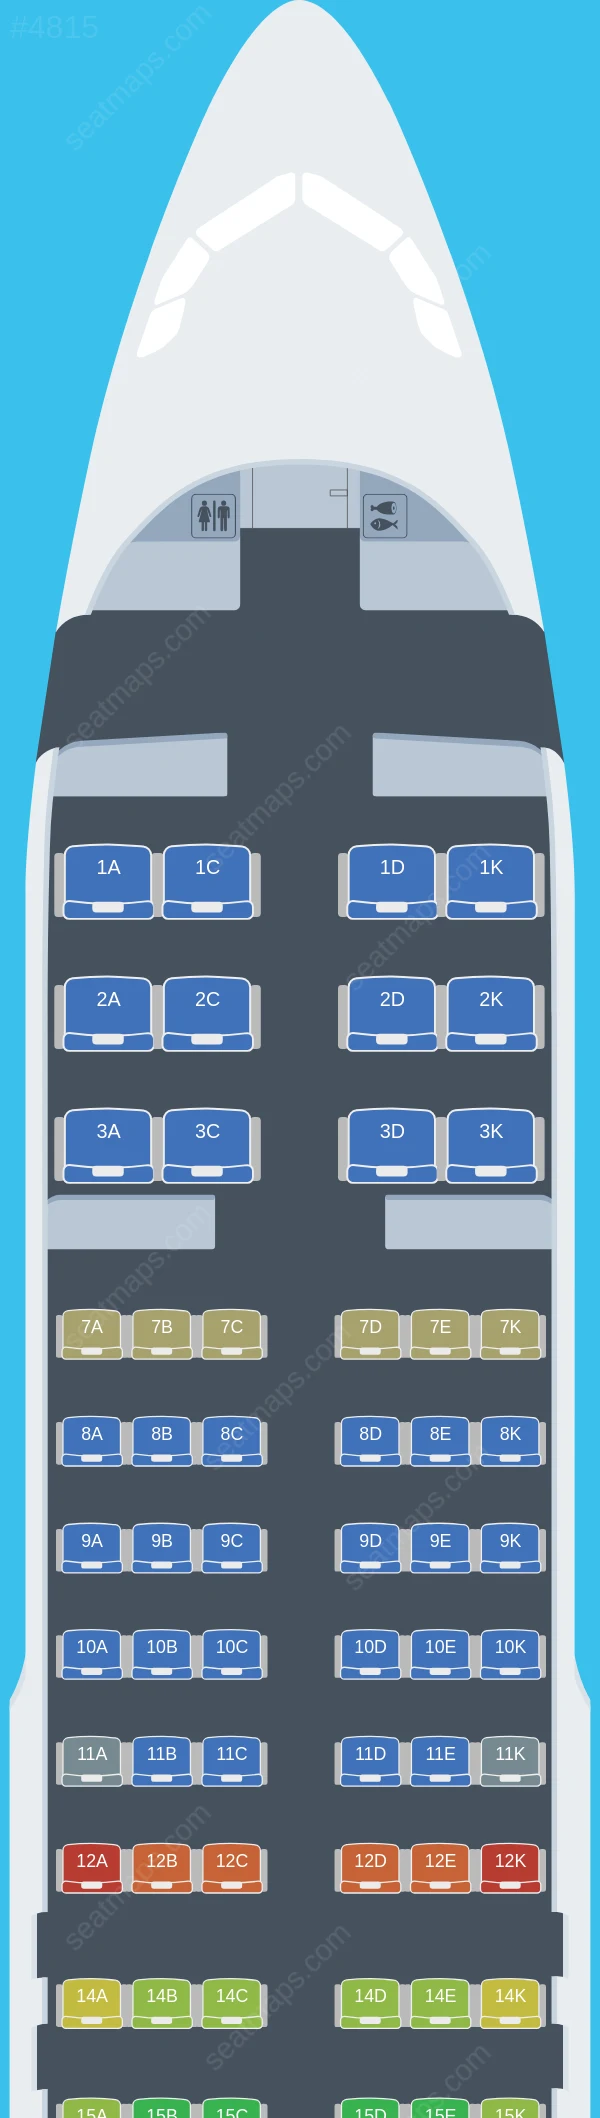 Avianca Airbus A320-200 V.2 seatmap preview